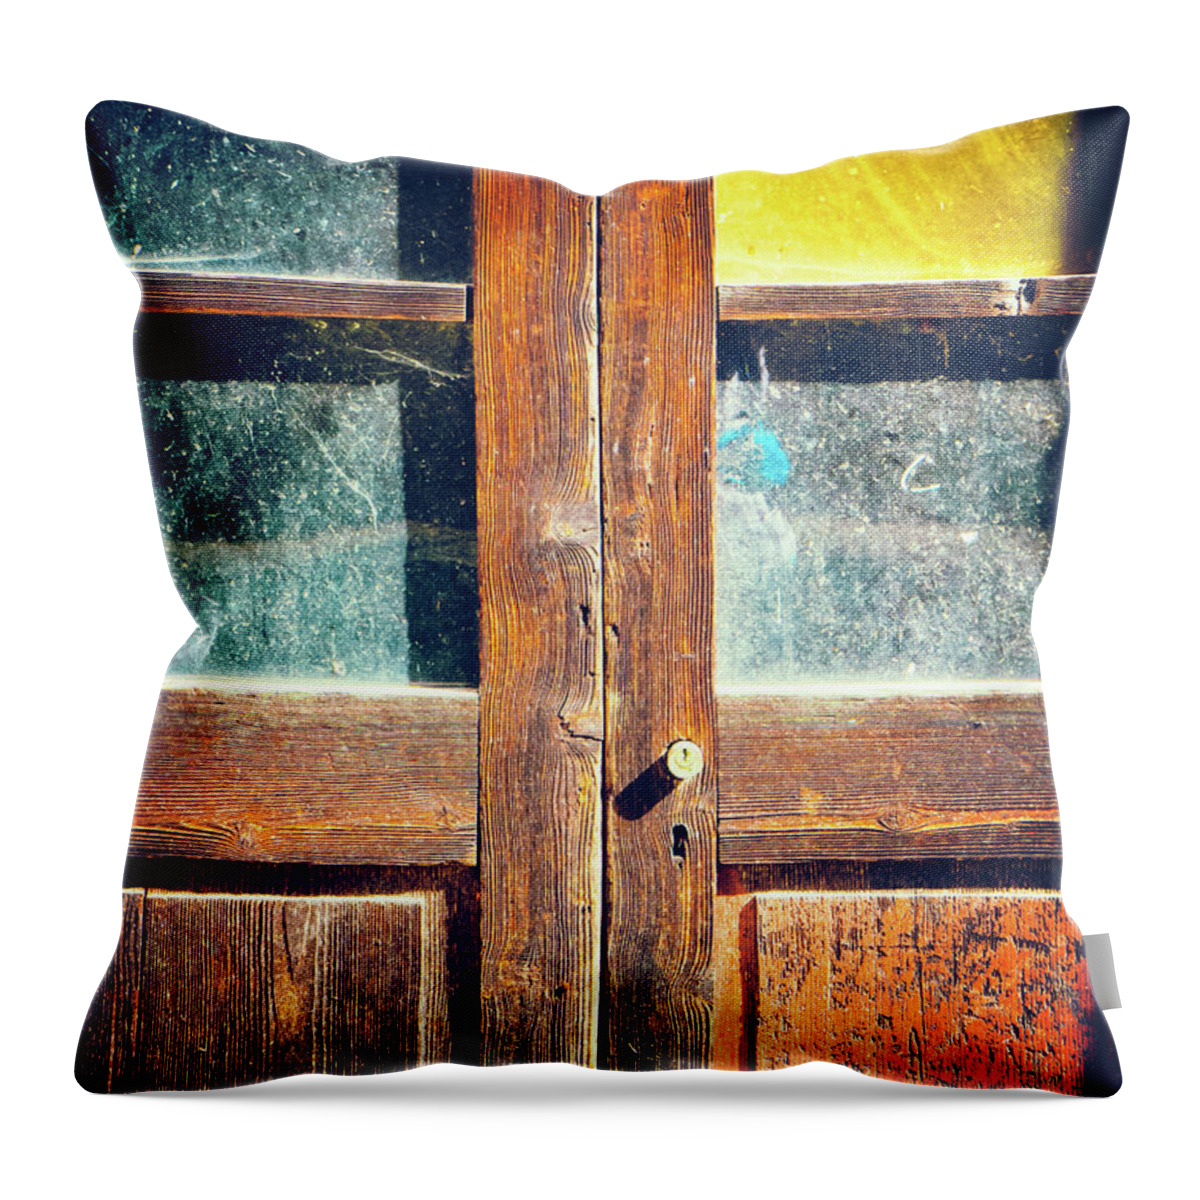 Architecture Throw Pillow featuring the photograph Old rotten door by Silvia Ganora